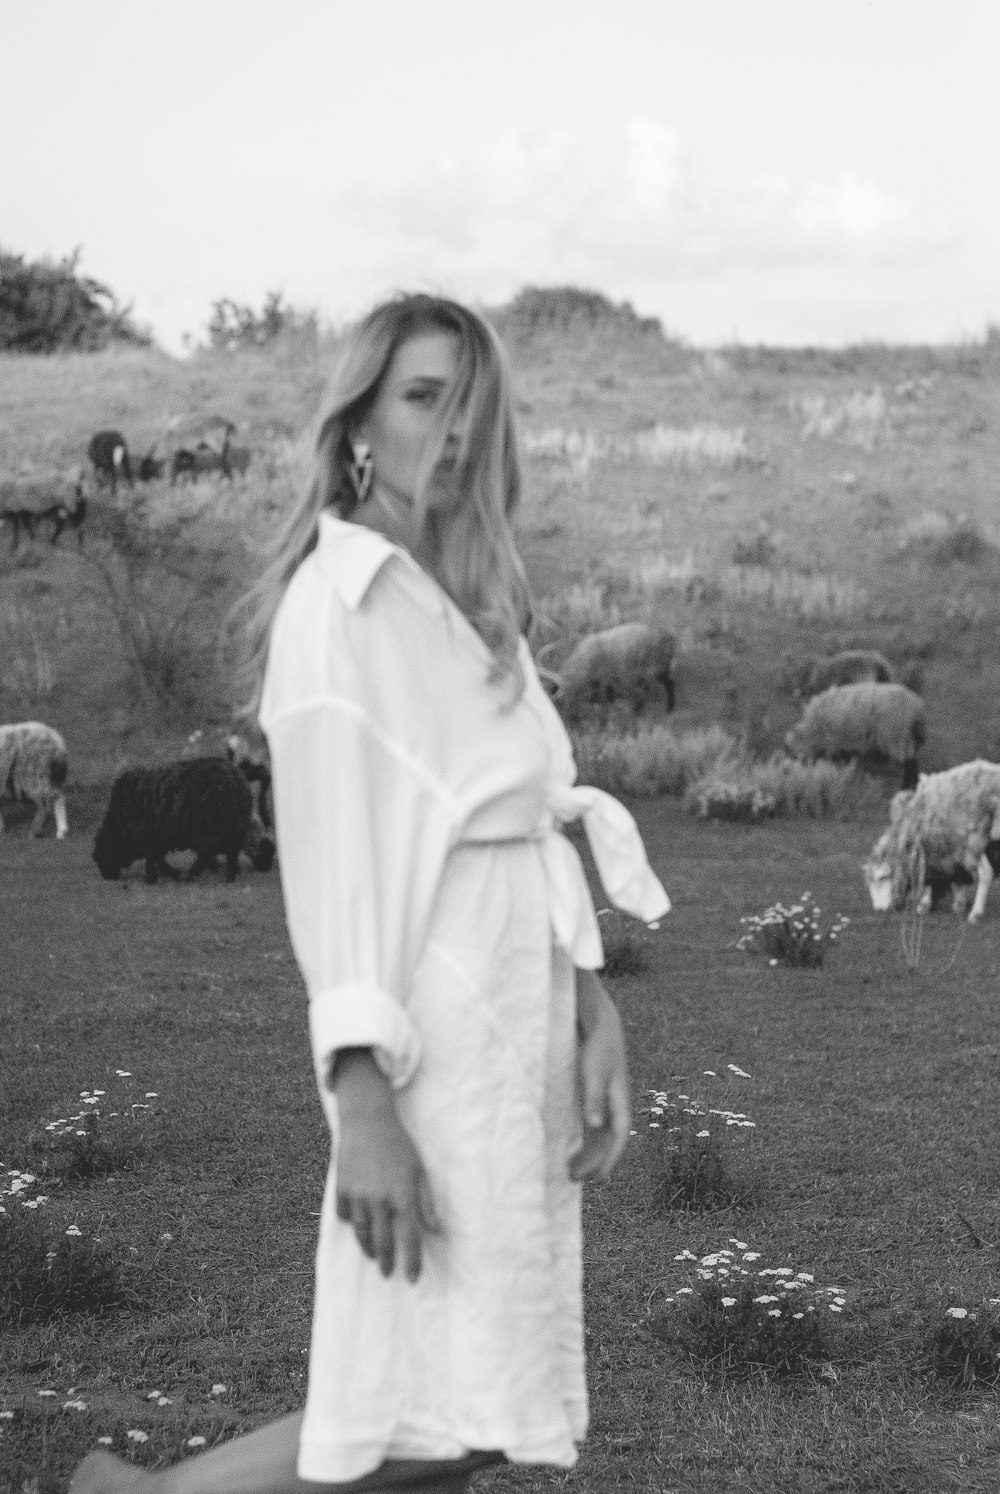 grayscale photo of woman in robe standing on grass field